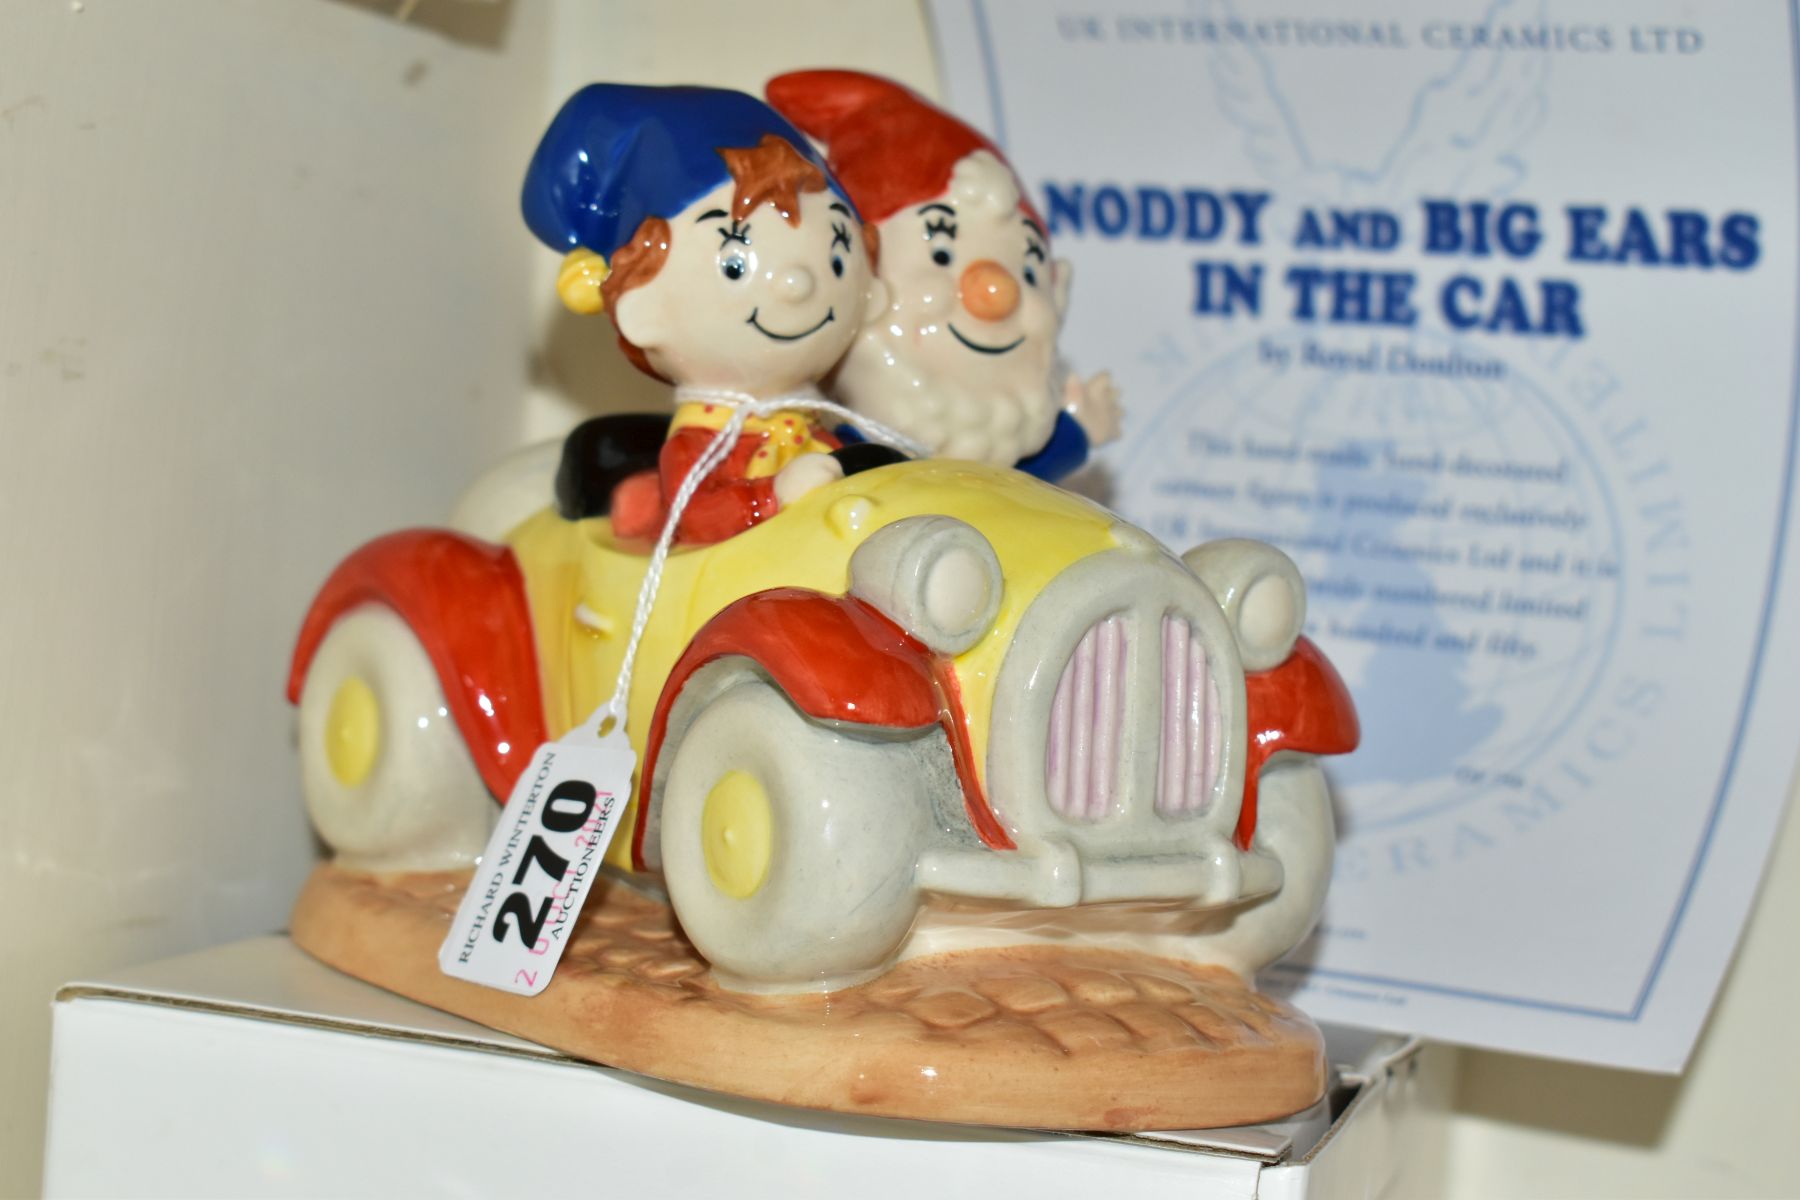 A BOXED LIMITED EDITION ROYAL DOULTON FOR UKI CERAMICS LTD FIGURE GROUP, Noddy and Big Ears in the